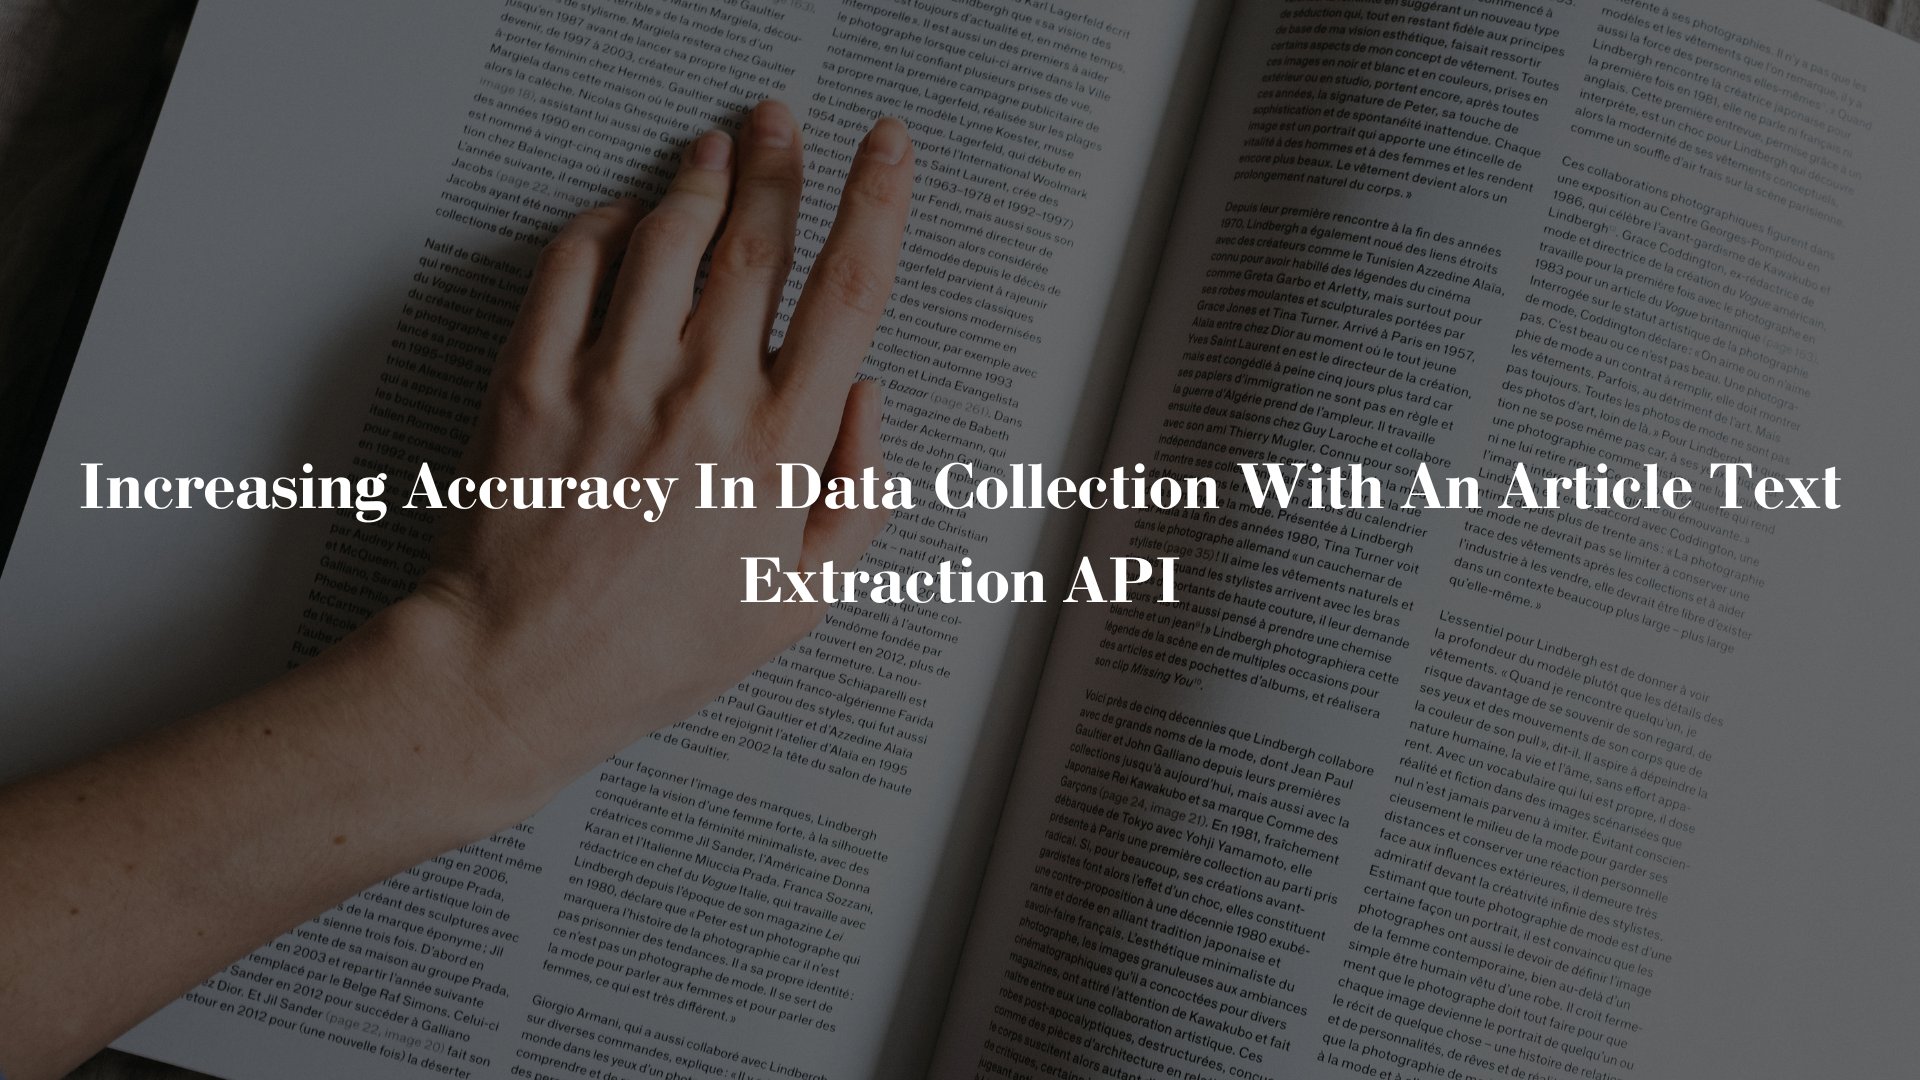 Increasing Accuracy In Data Collection With An Article Text Extraction API